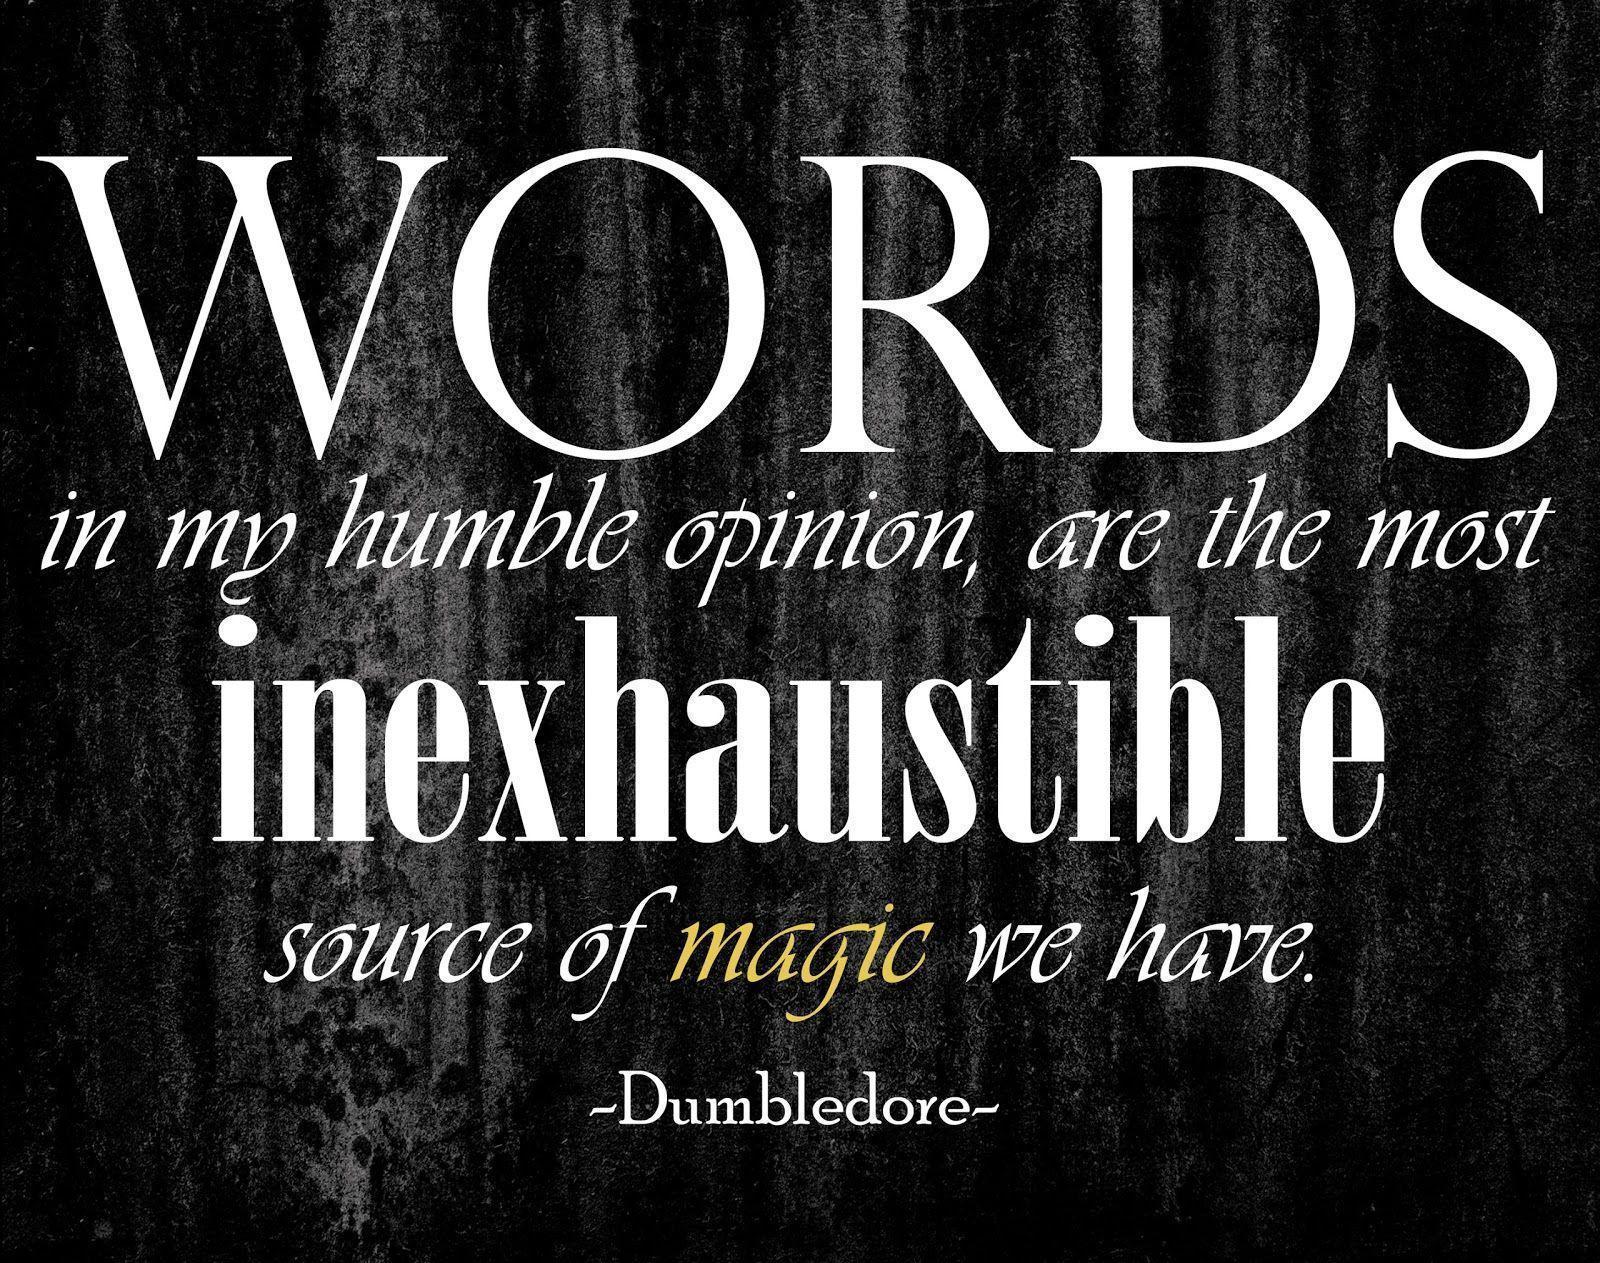 Harry Potter Quotes Wallpaper Backgrounds : Quotes Wallpapers